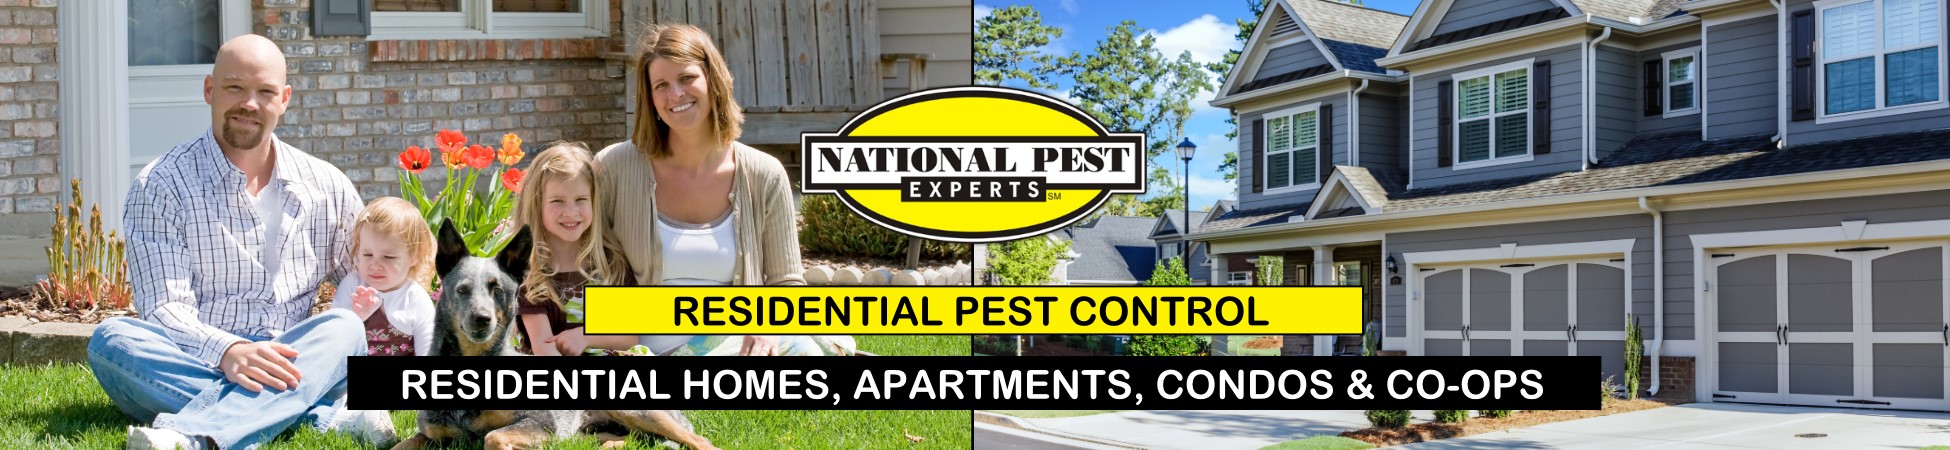 National Pest Experts - Residential exterminating and pest control in Levittown, NY